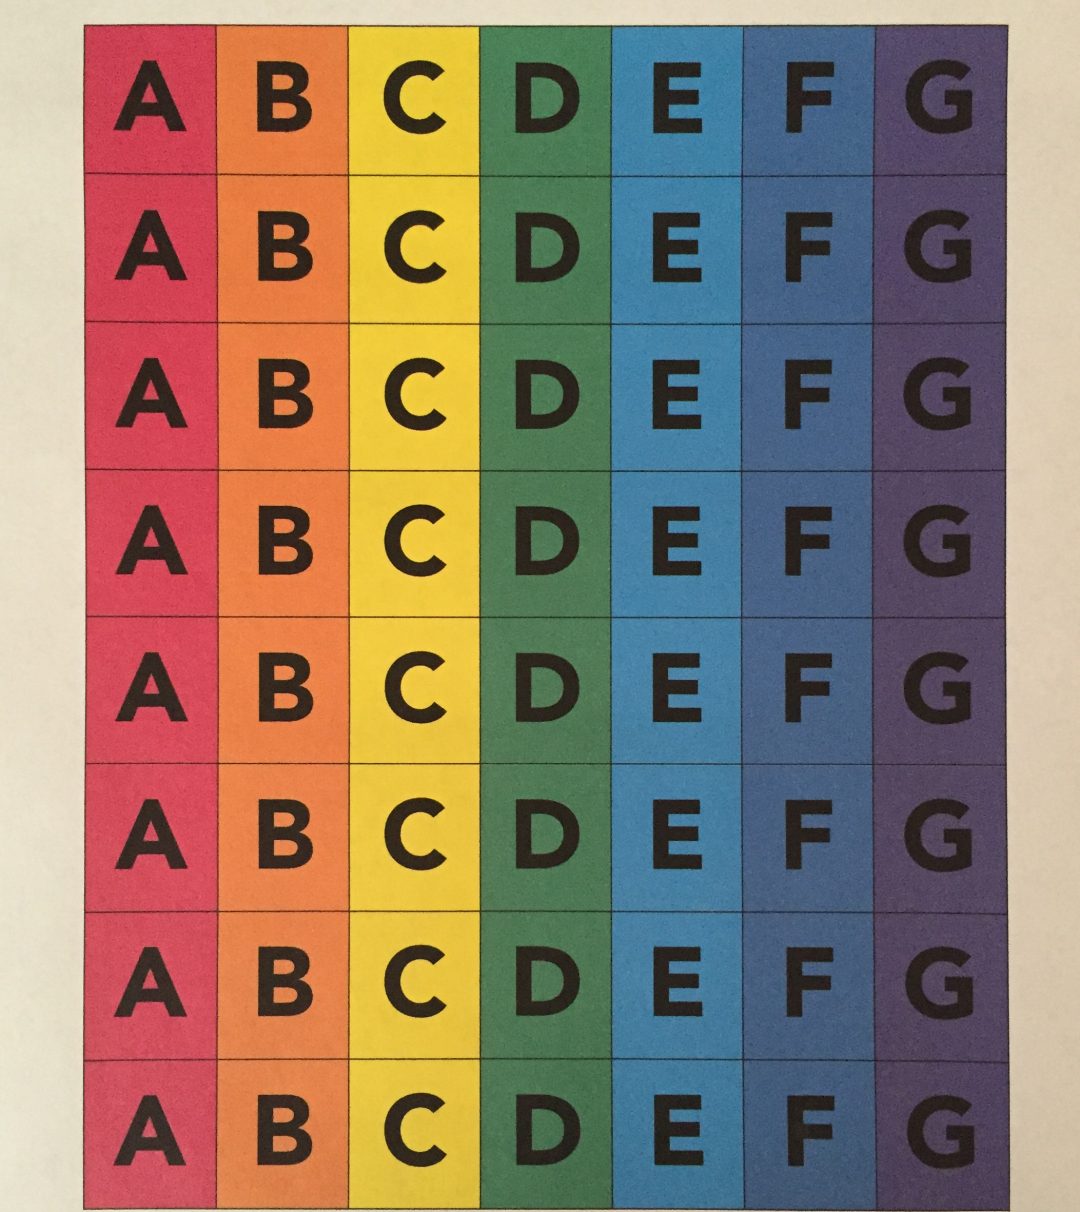 9-best-images-of-printable-upper-and-lowercase-alphabet-upper-and